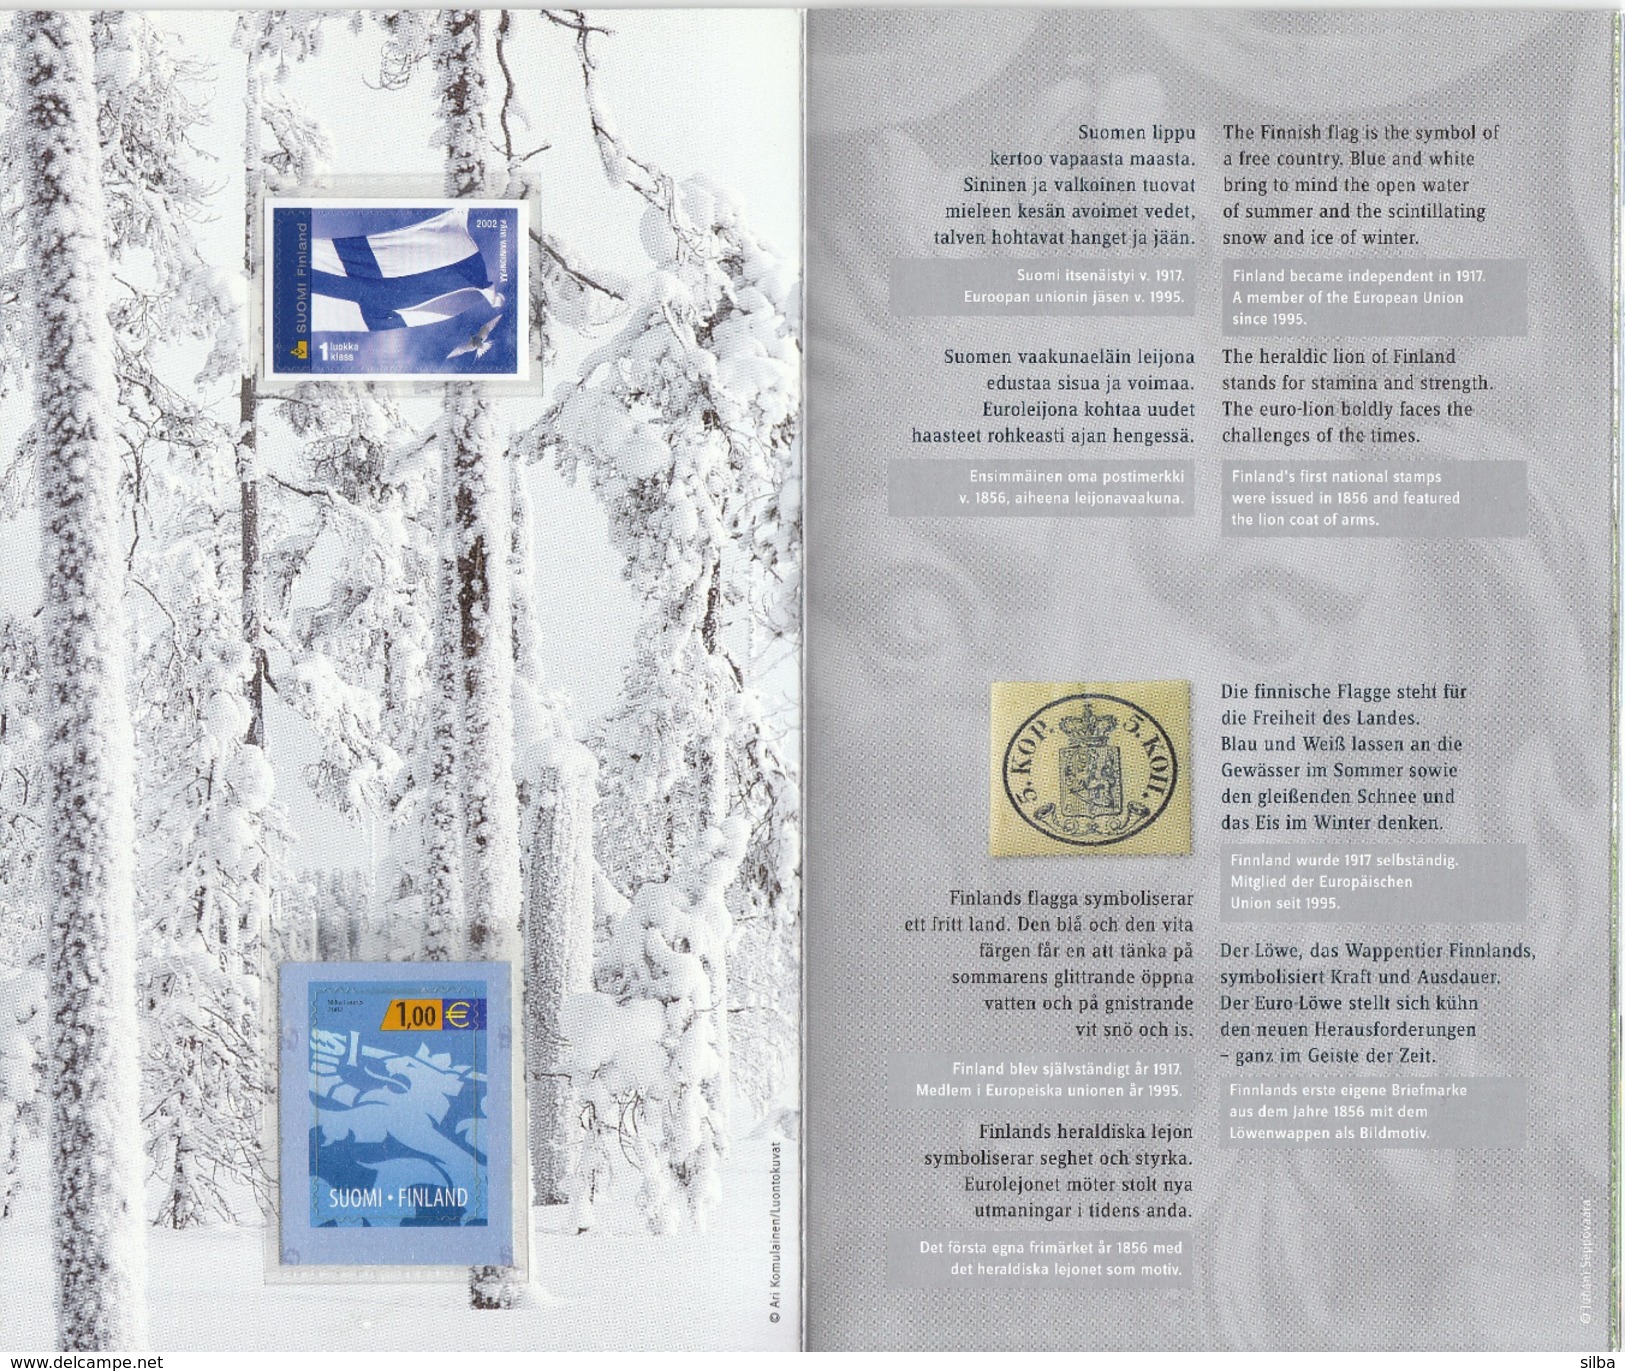 Finland In Stamps - Colecciones